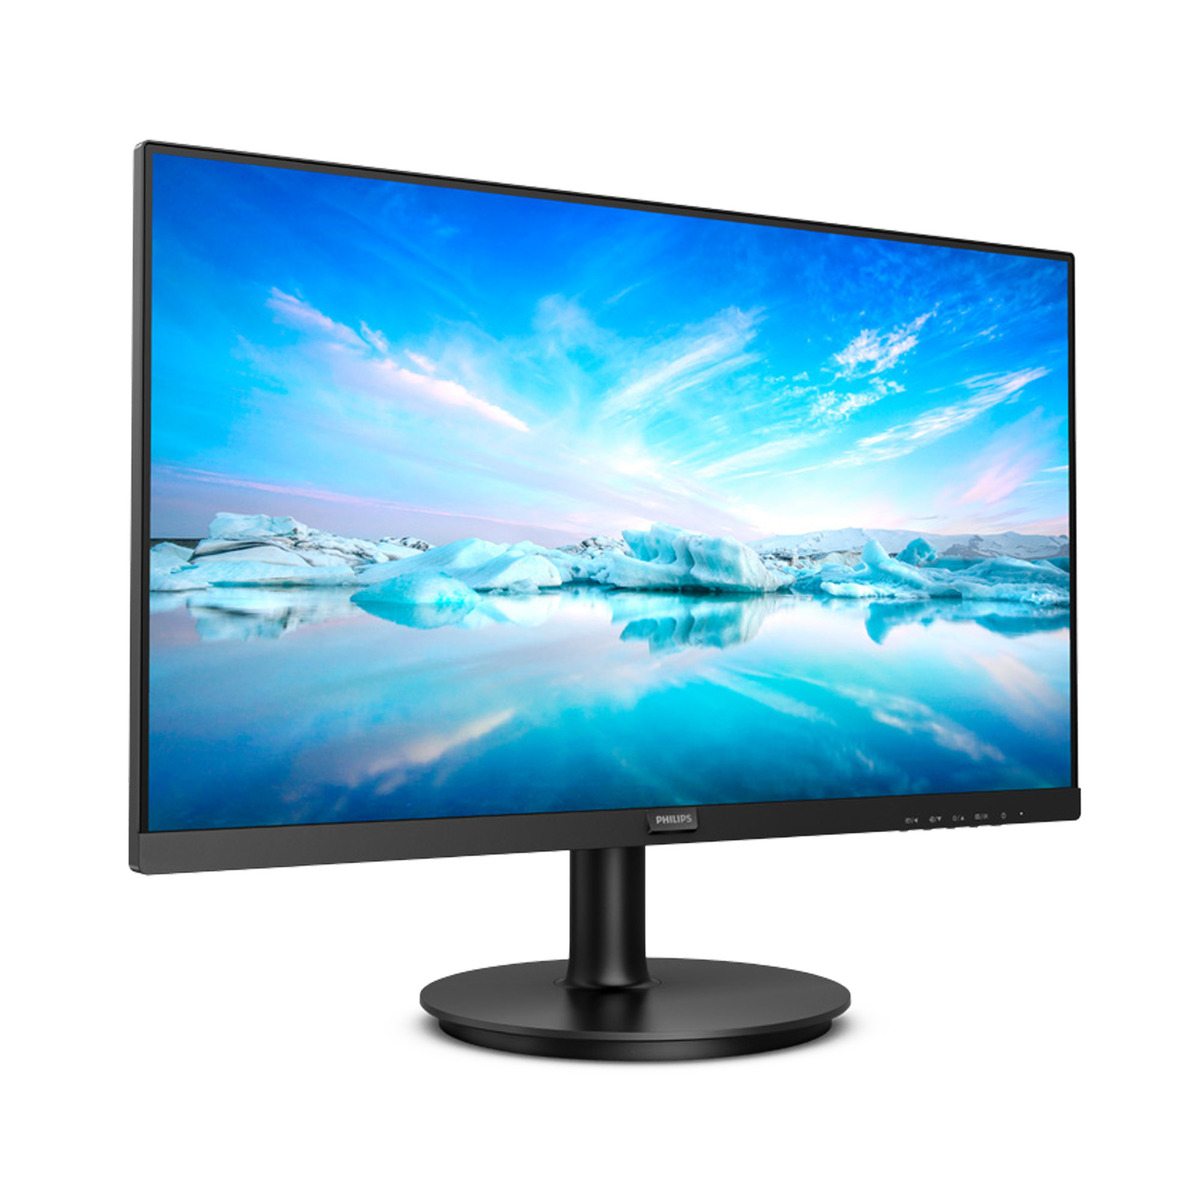 Philips LED Monitor 221V8L 21.5 inch Online at Best Price | PC Monitors